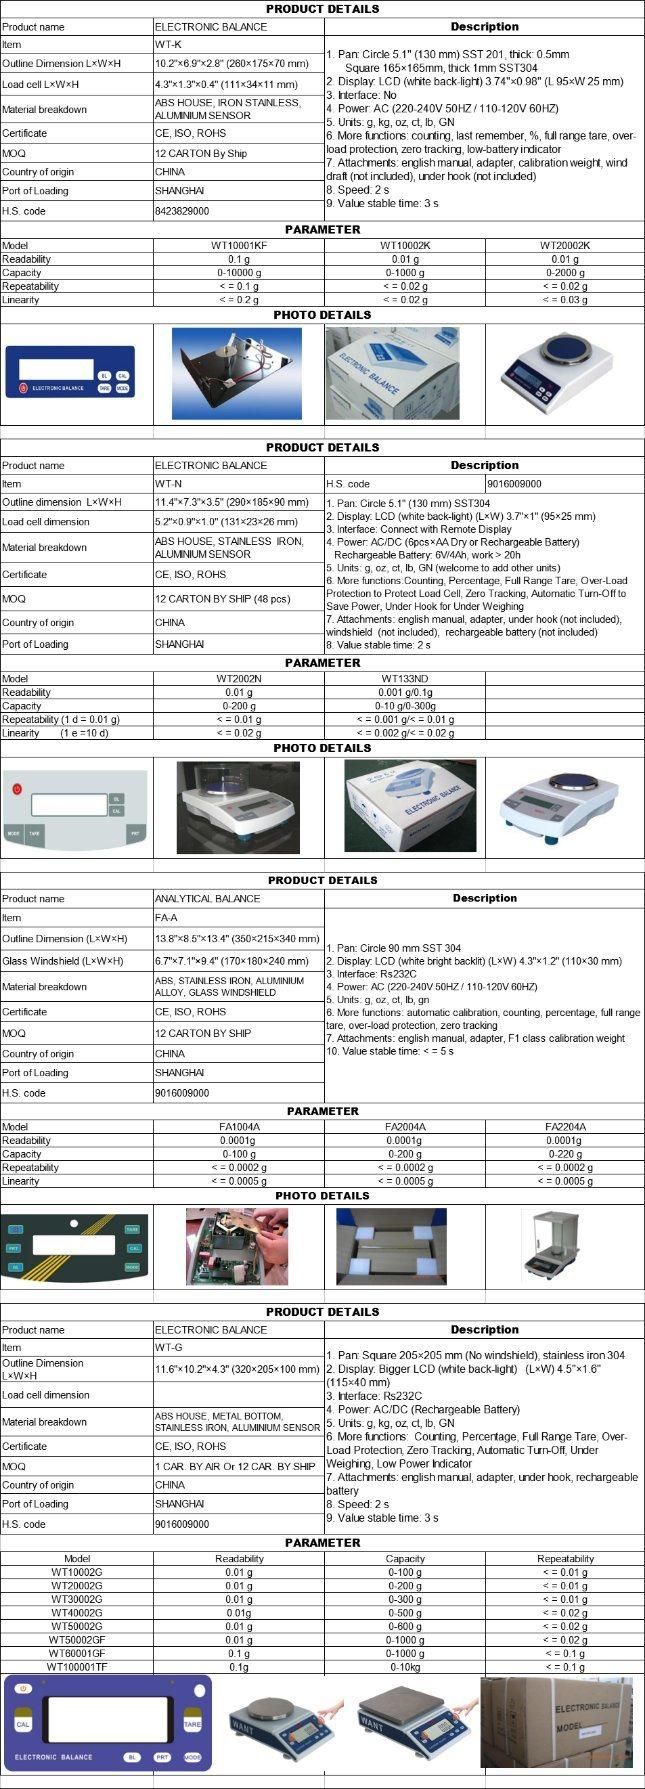 Load Cell Rated 200kg 150kg 100kg Weighing Scales